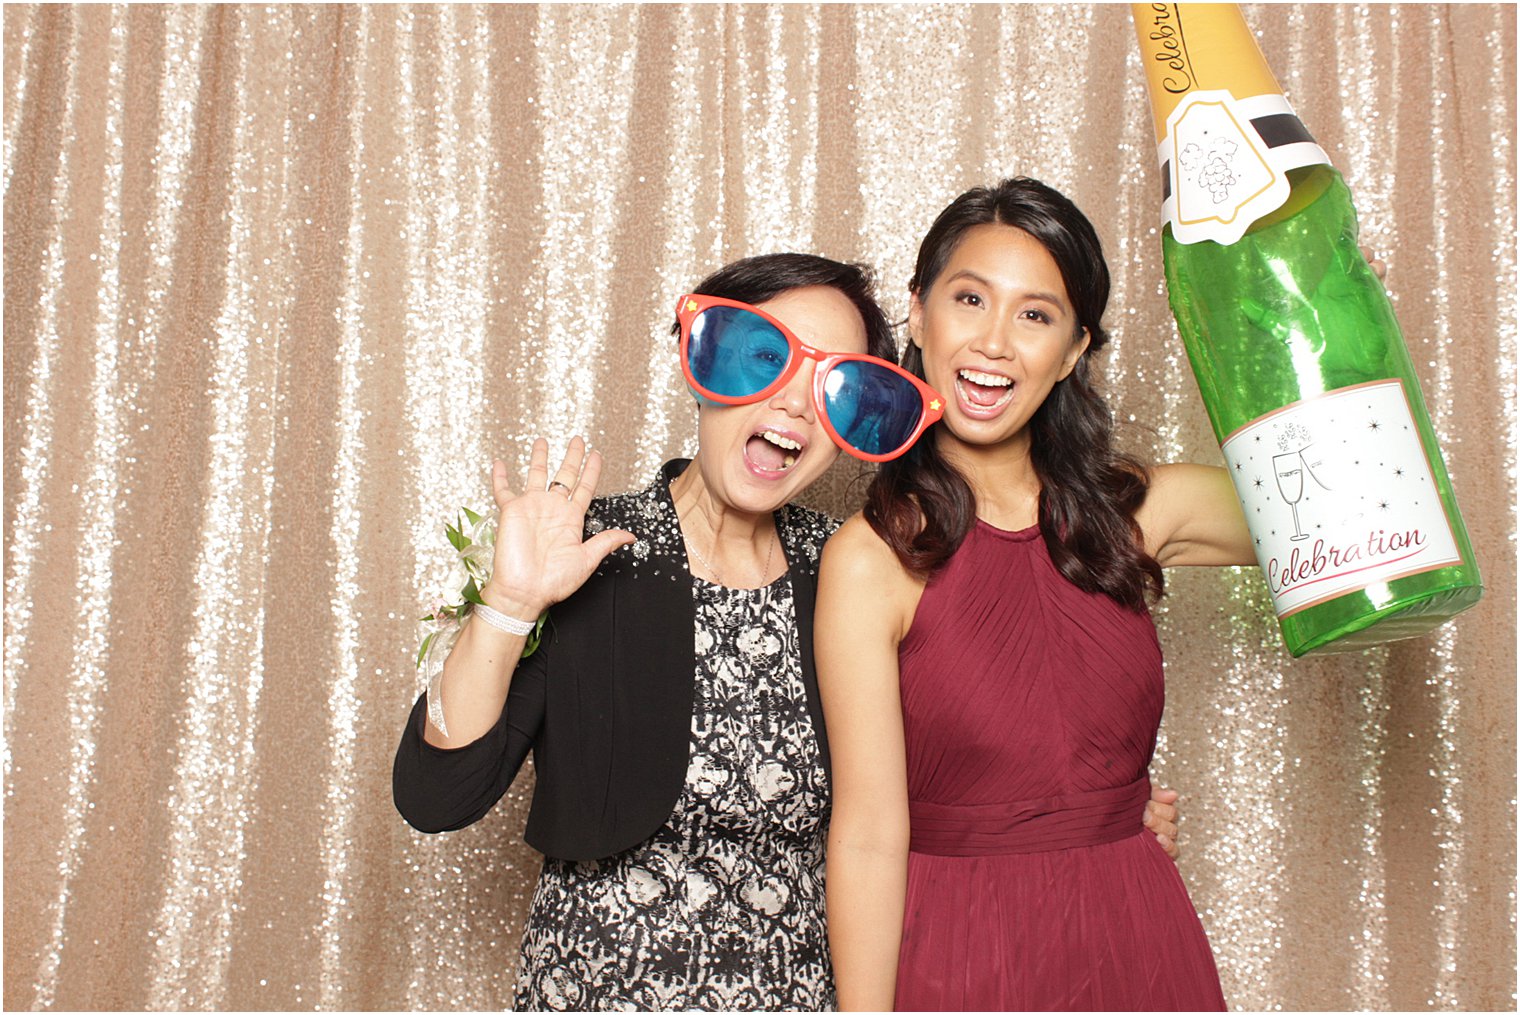 wedding guests play in East Brunswick NJ wedding reception photo booth